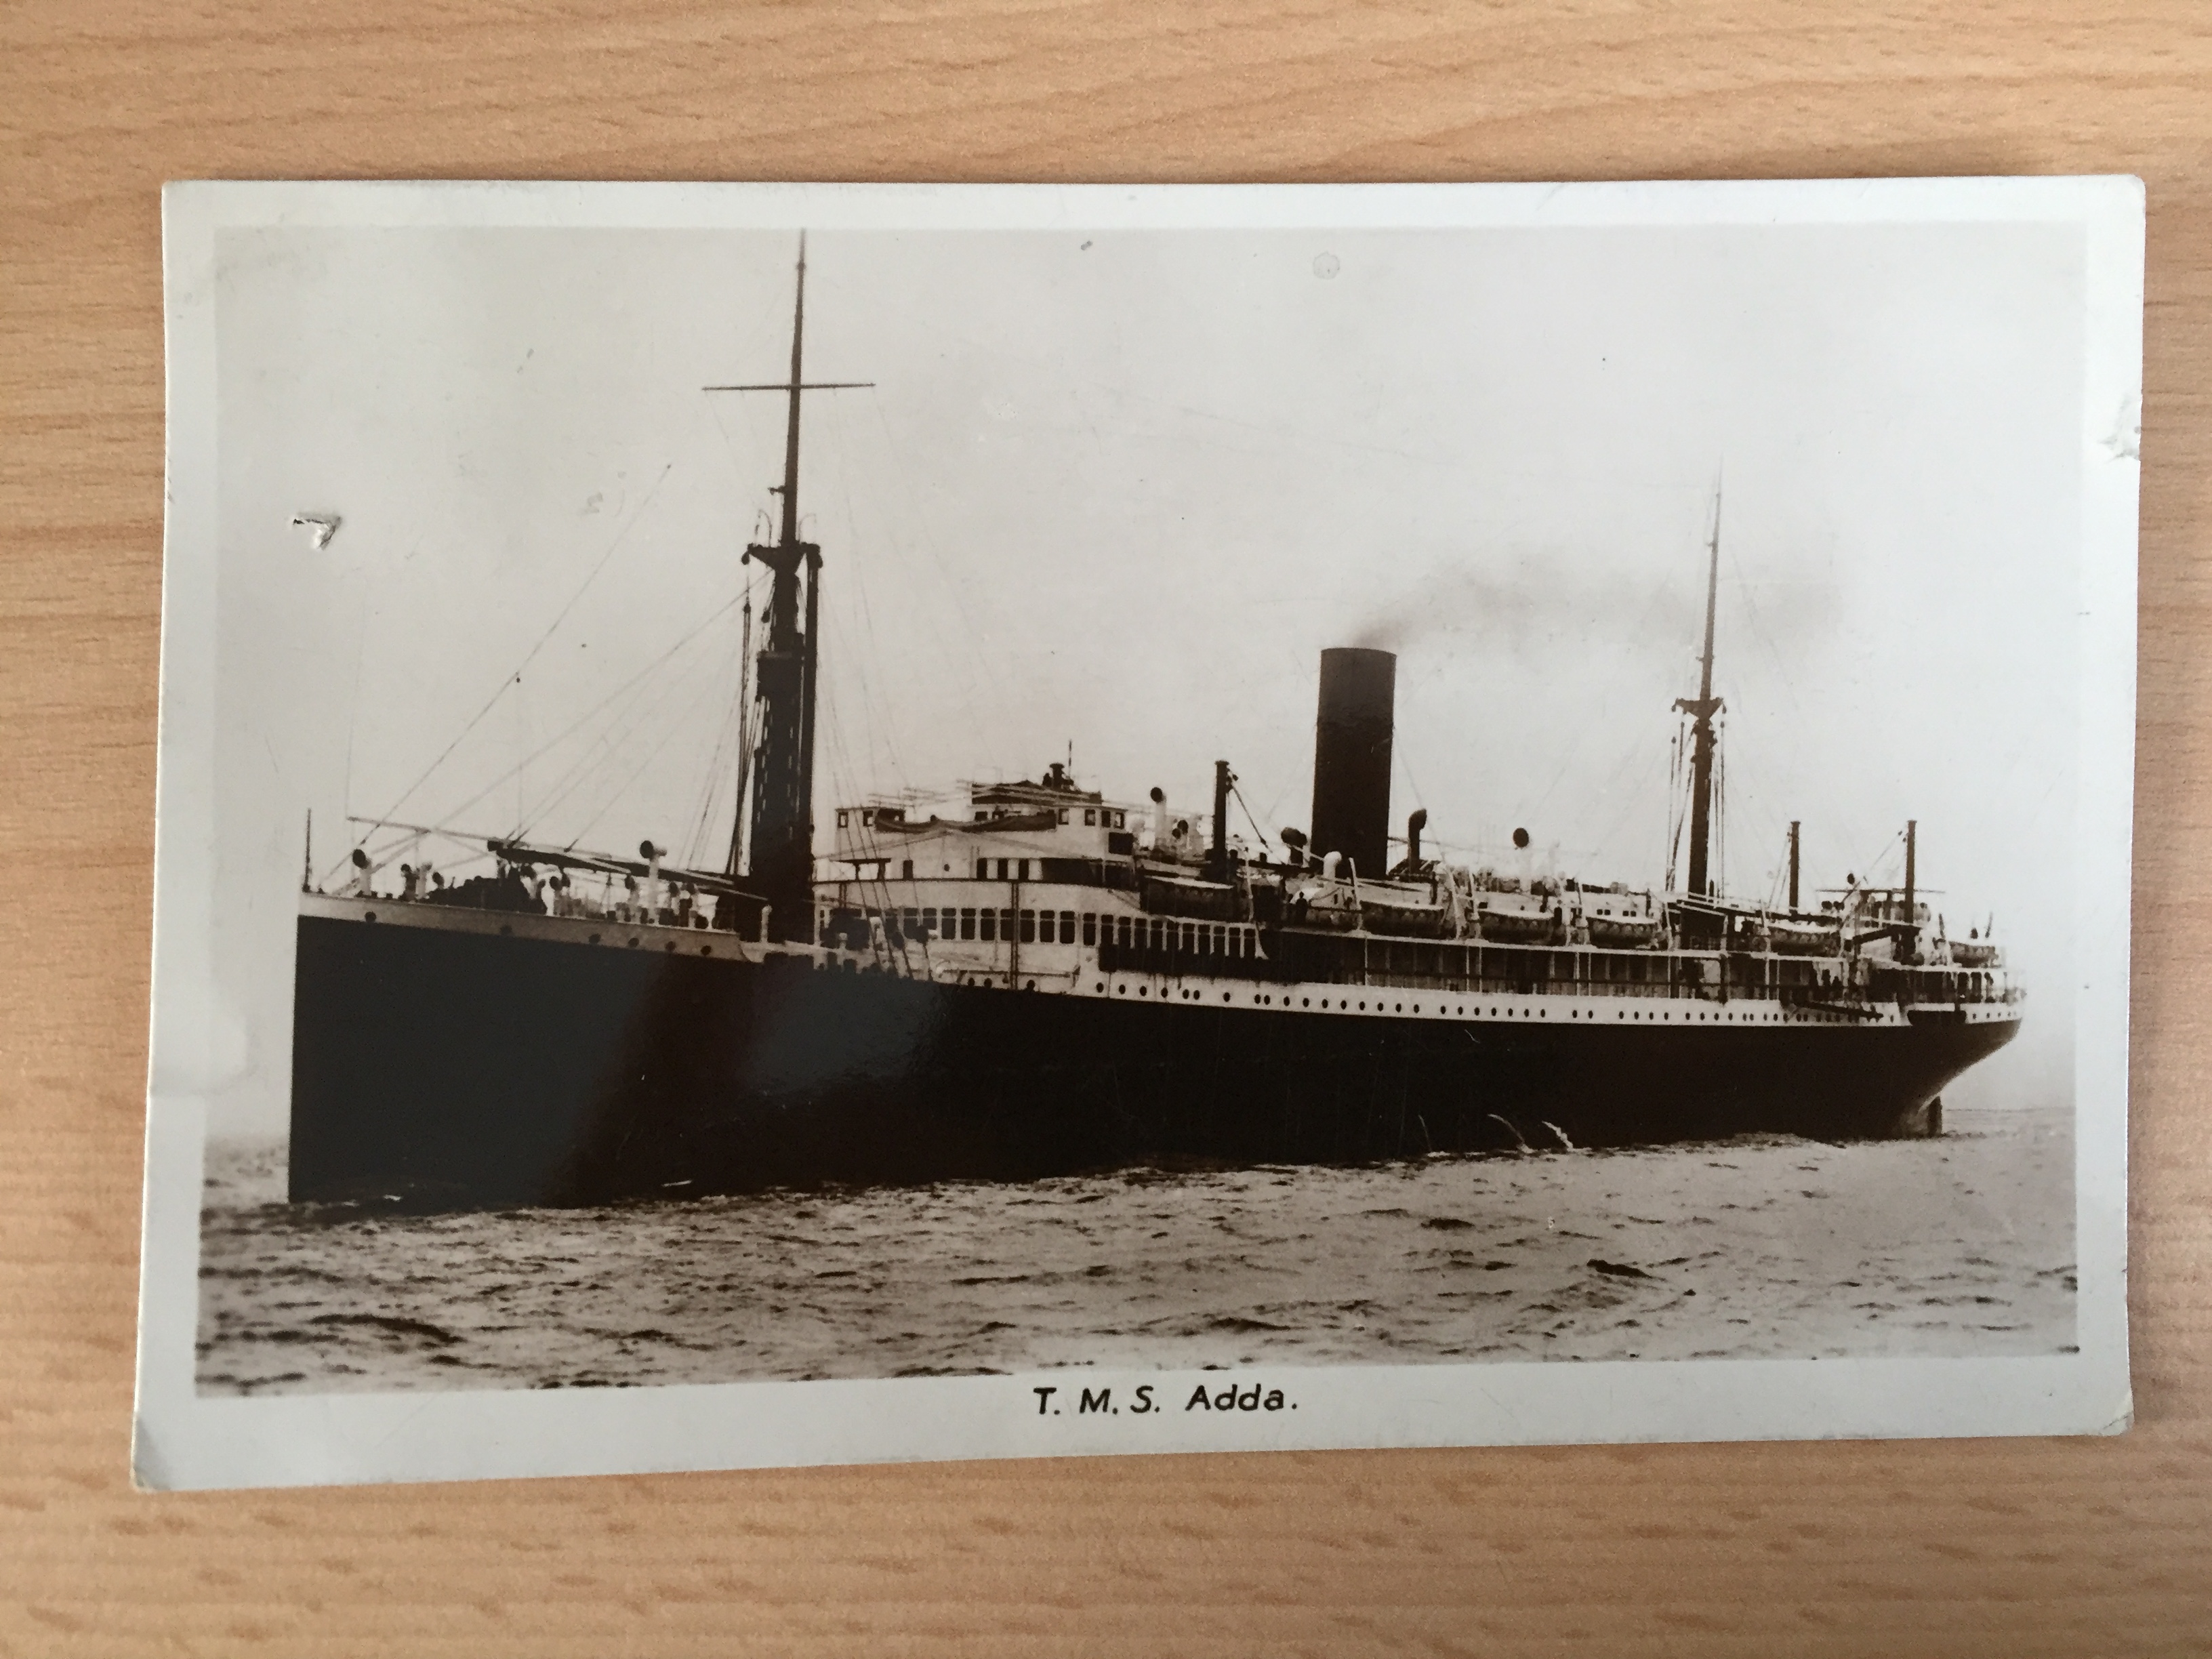 RARE TO FIND USED POSTCARD FROM THE ELDER DEMPSTER LINE VESSEL THE ADDA